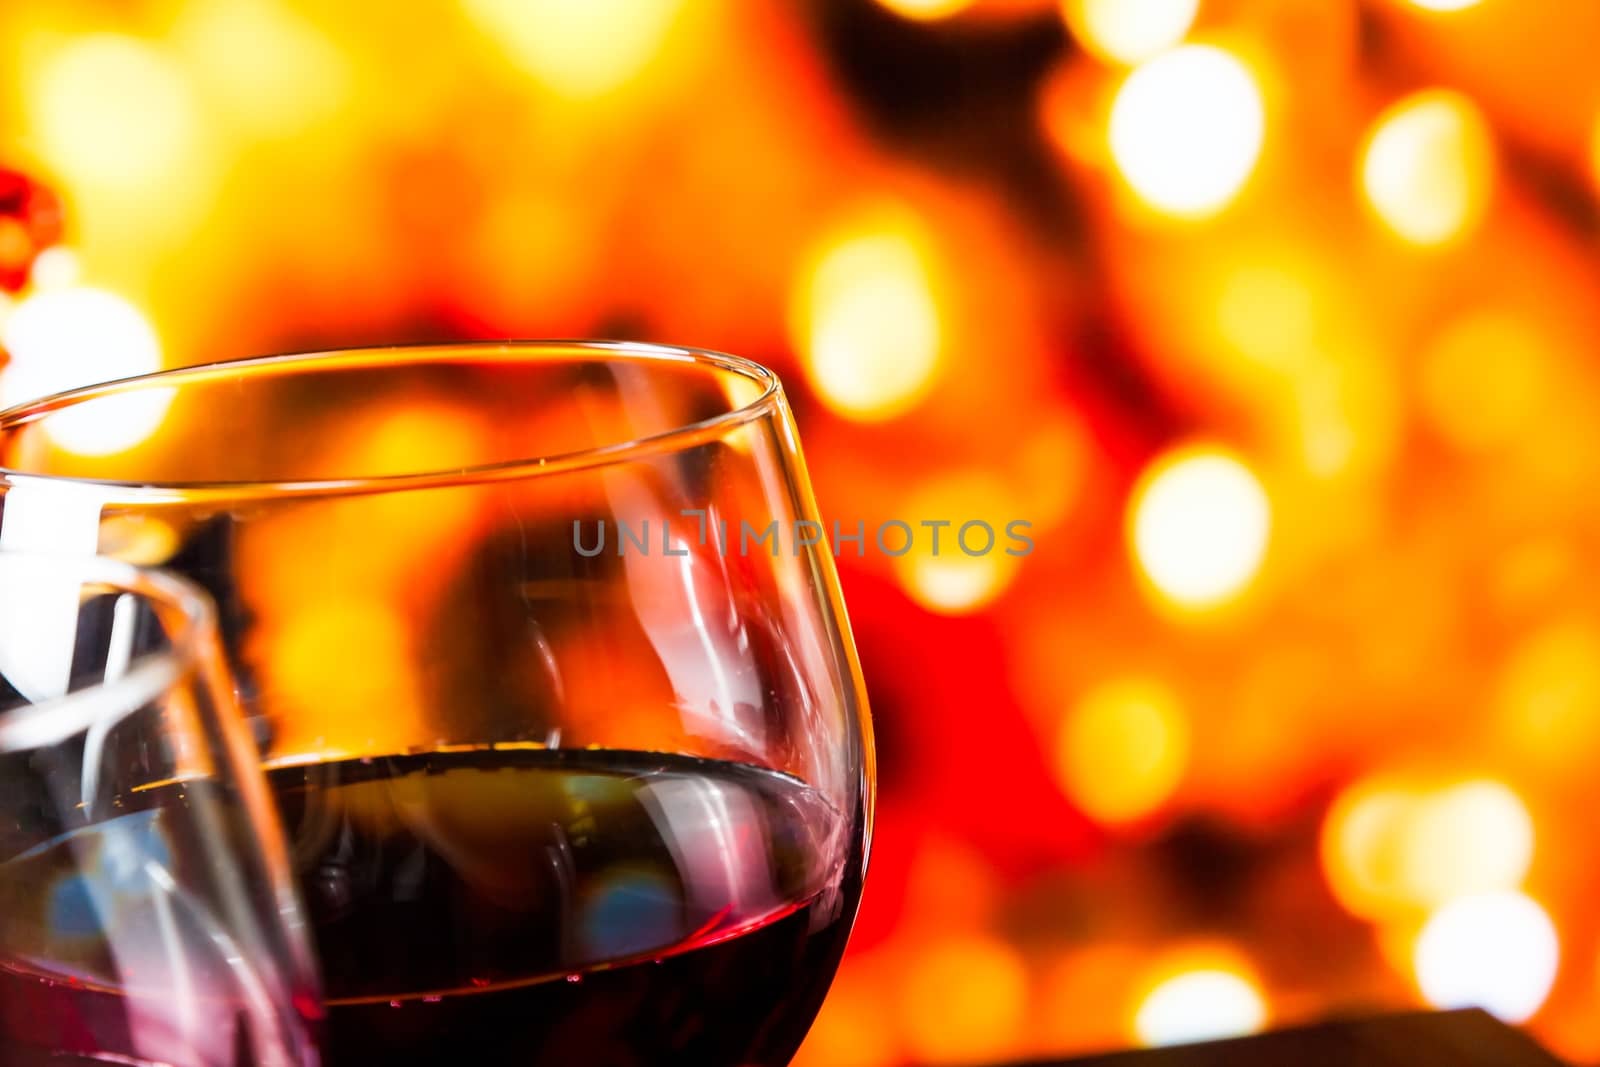 red wine glasses against colorful unfocused lights background by donfiore